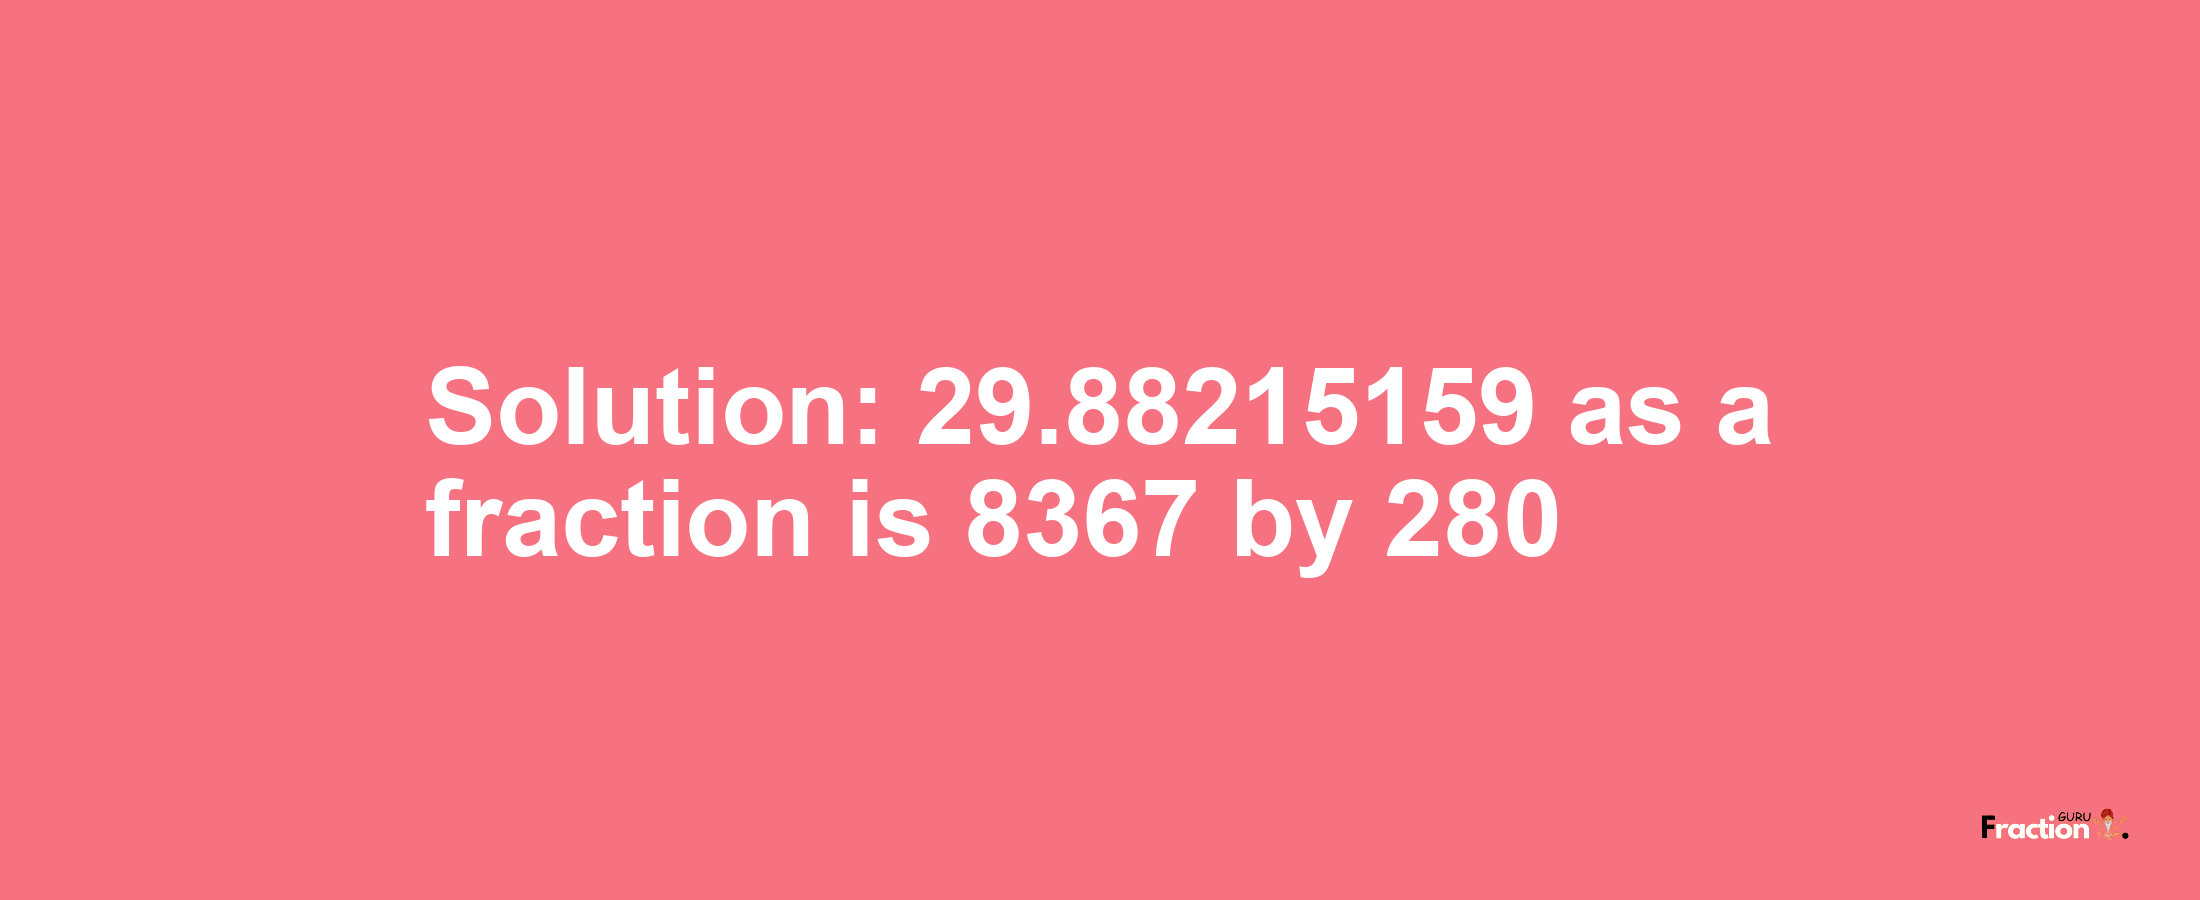 Solution:29.88215159 as a fraction is 8367/280